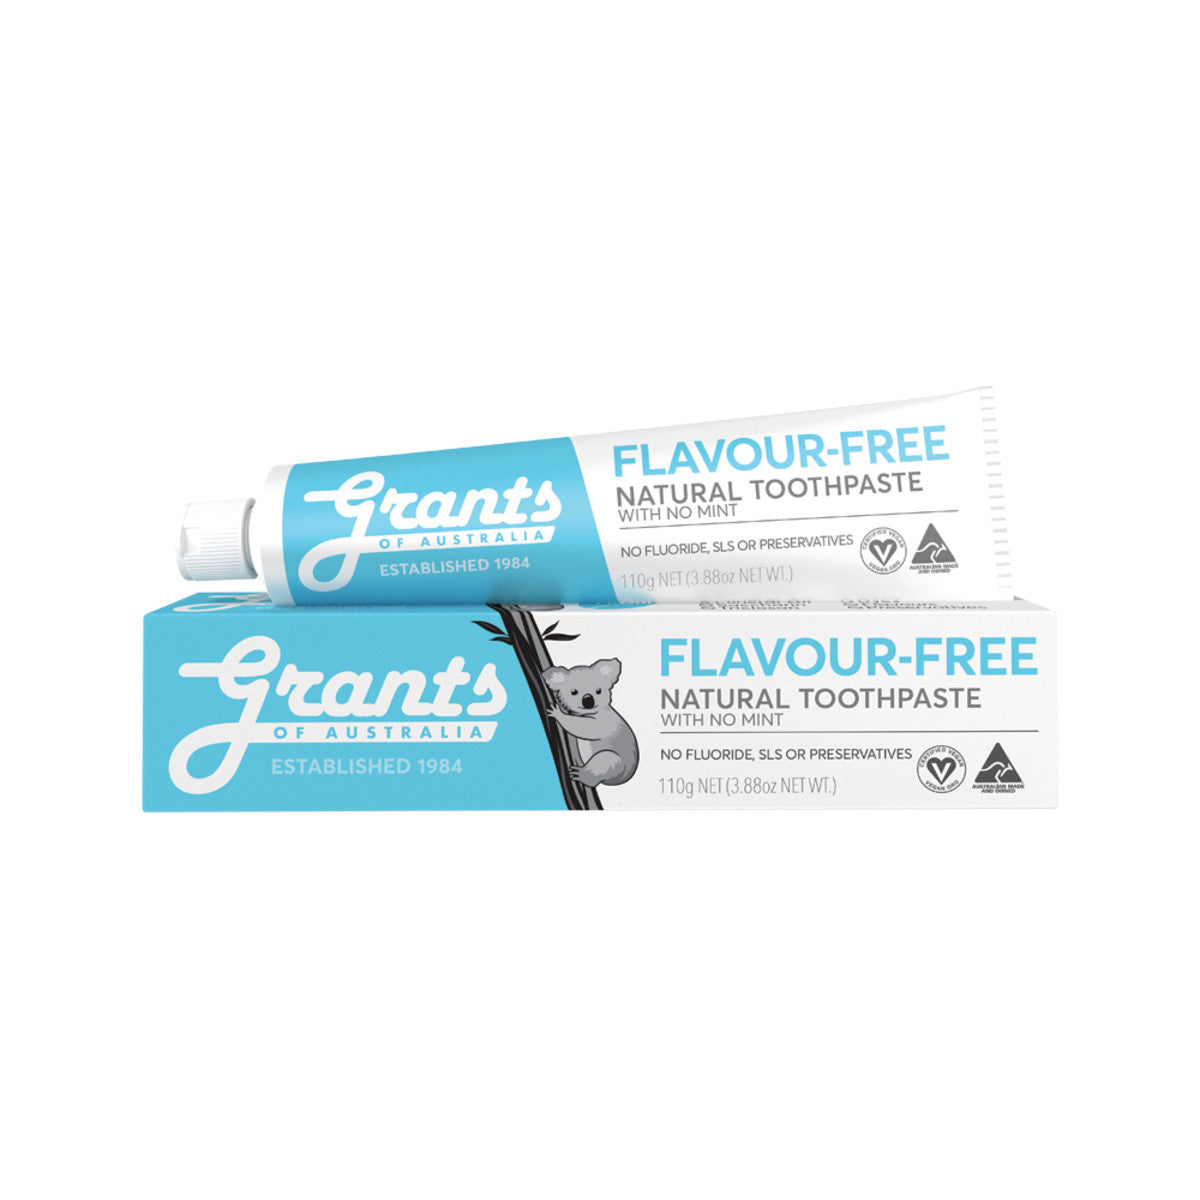 Grants - Natural Toothpaste (Flavour-Free with No Mint)